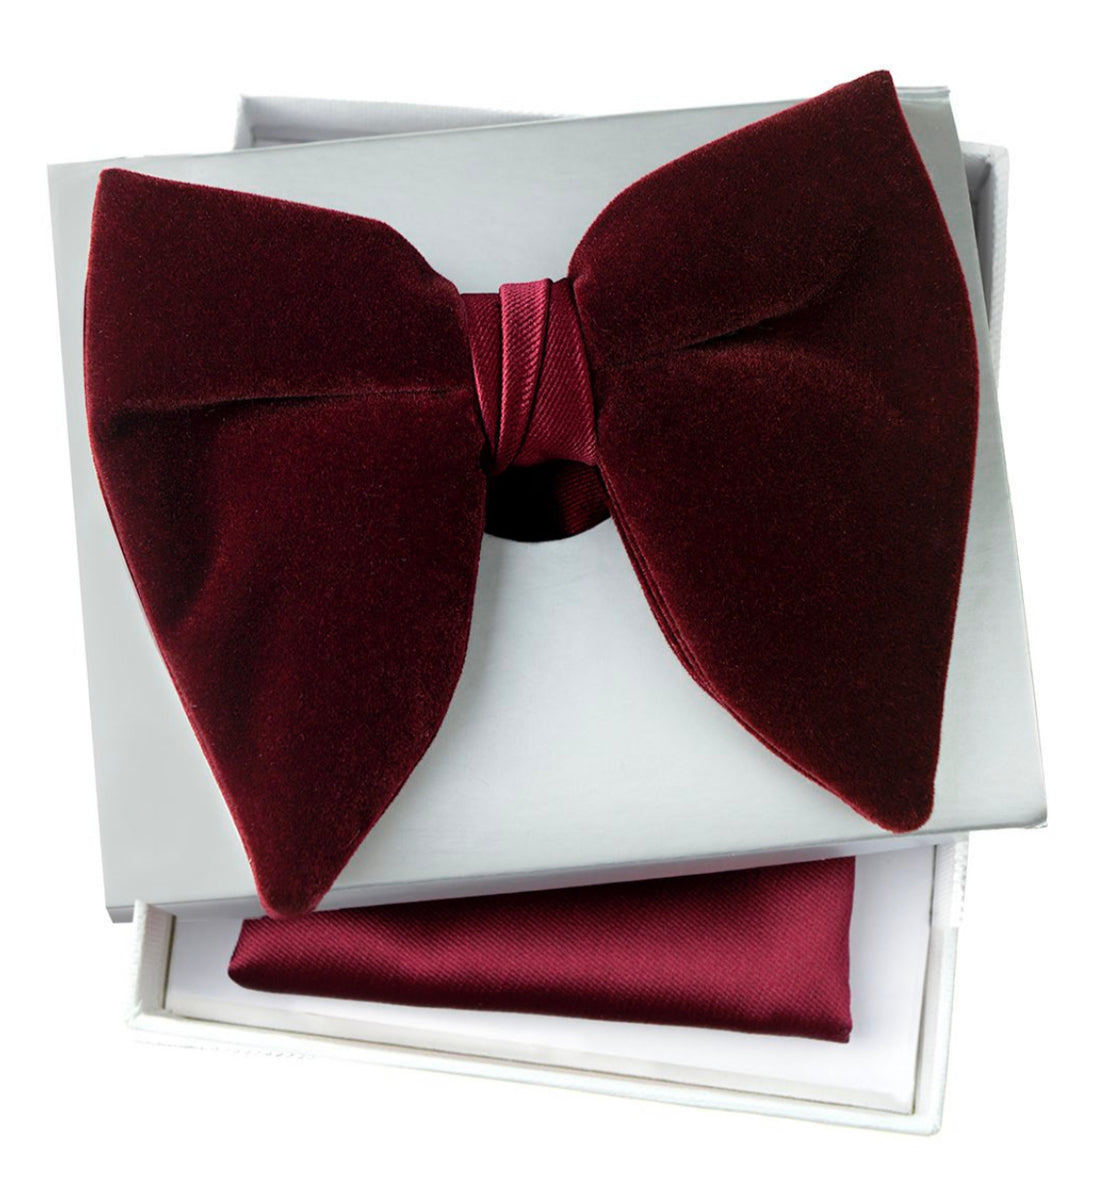 Connaisseur - Burgundy wine Velvet Butterfly Bow Tie with pocket square